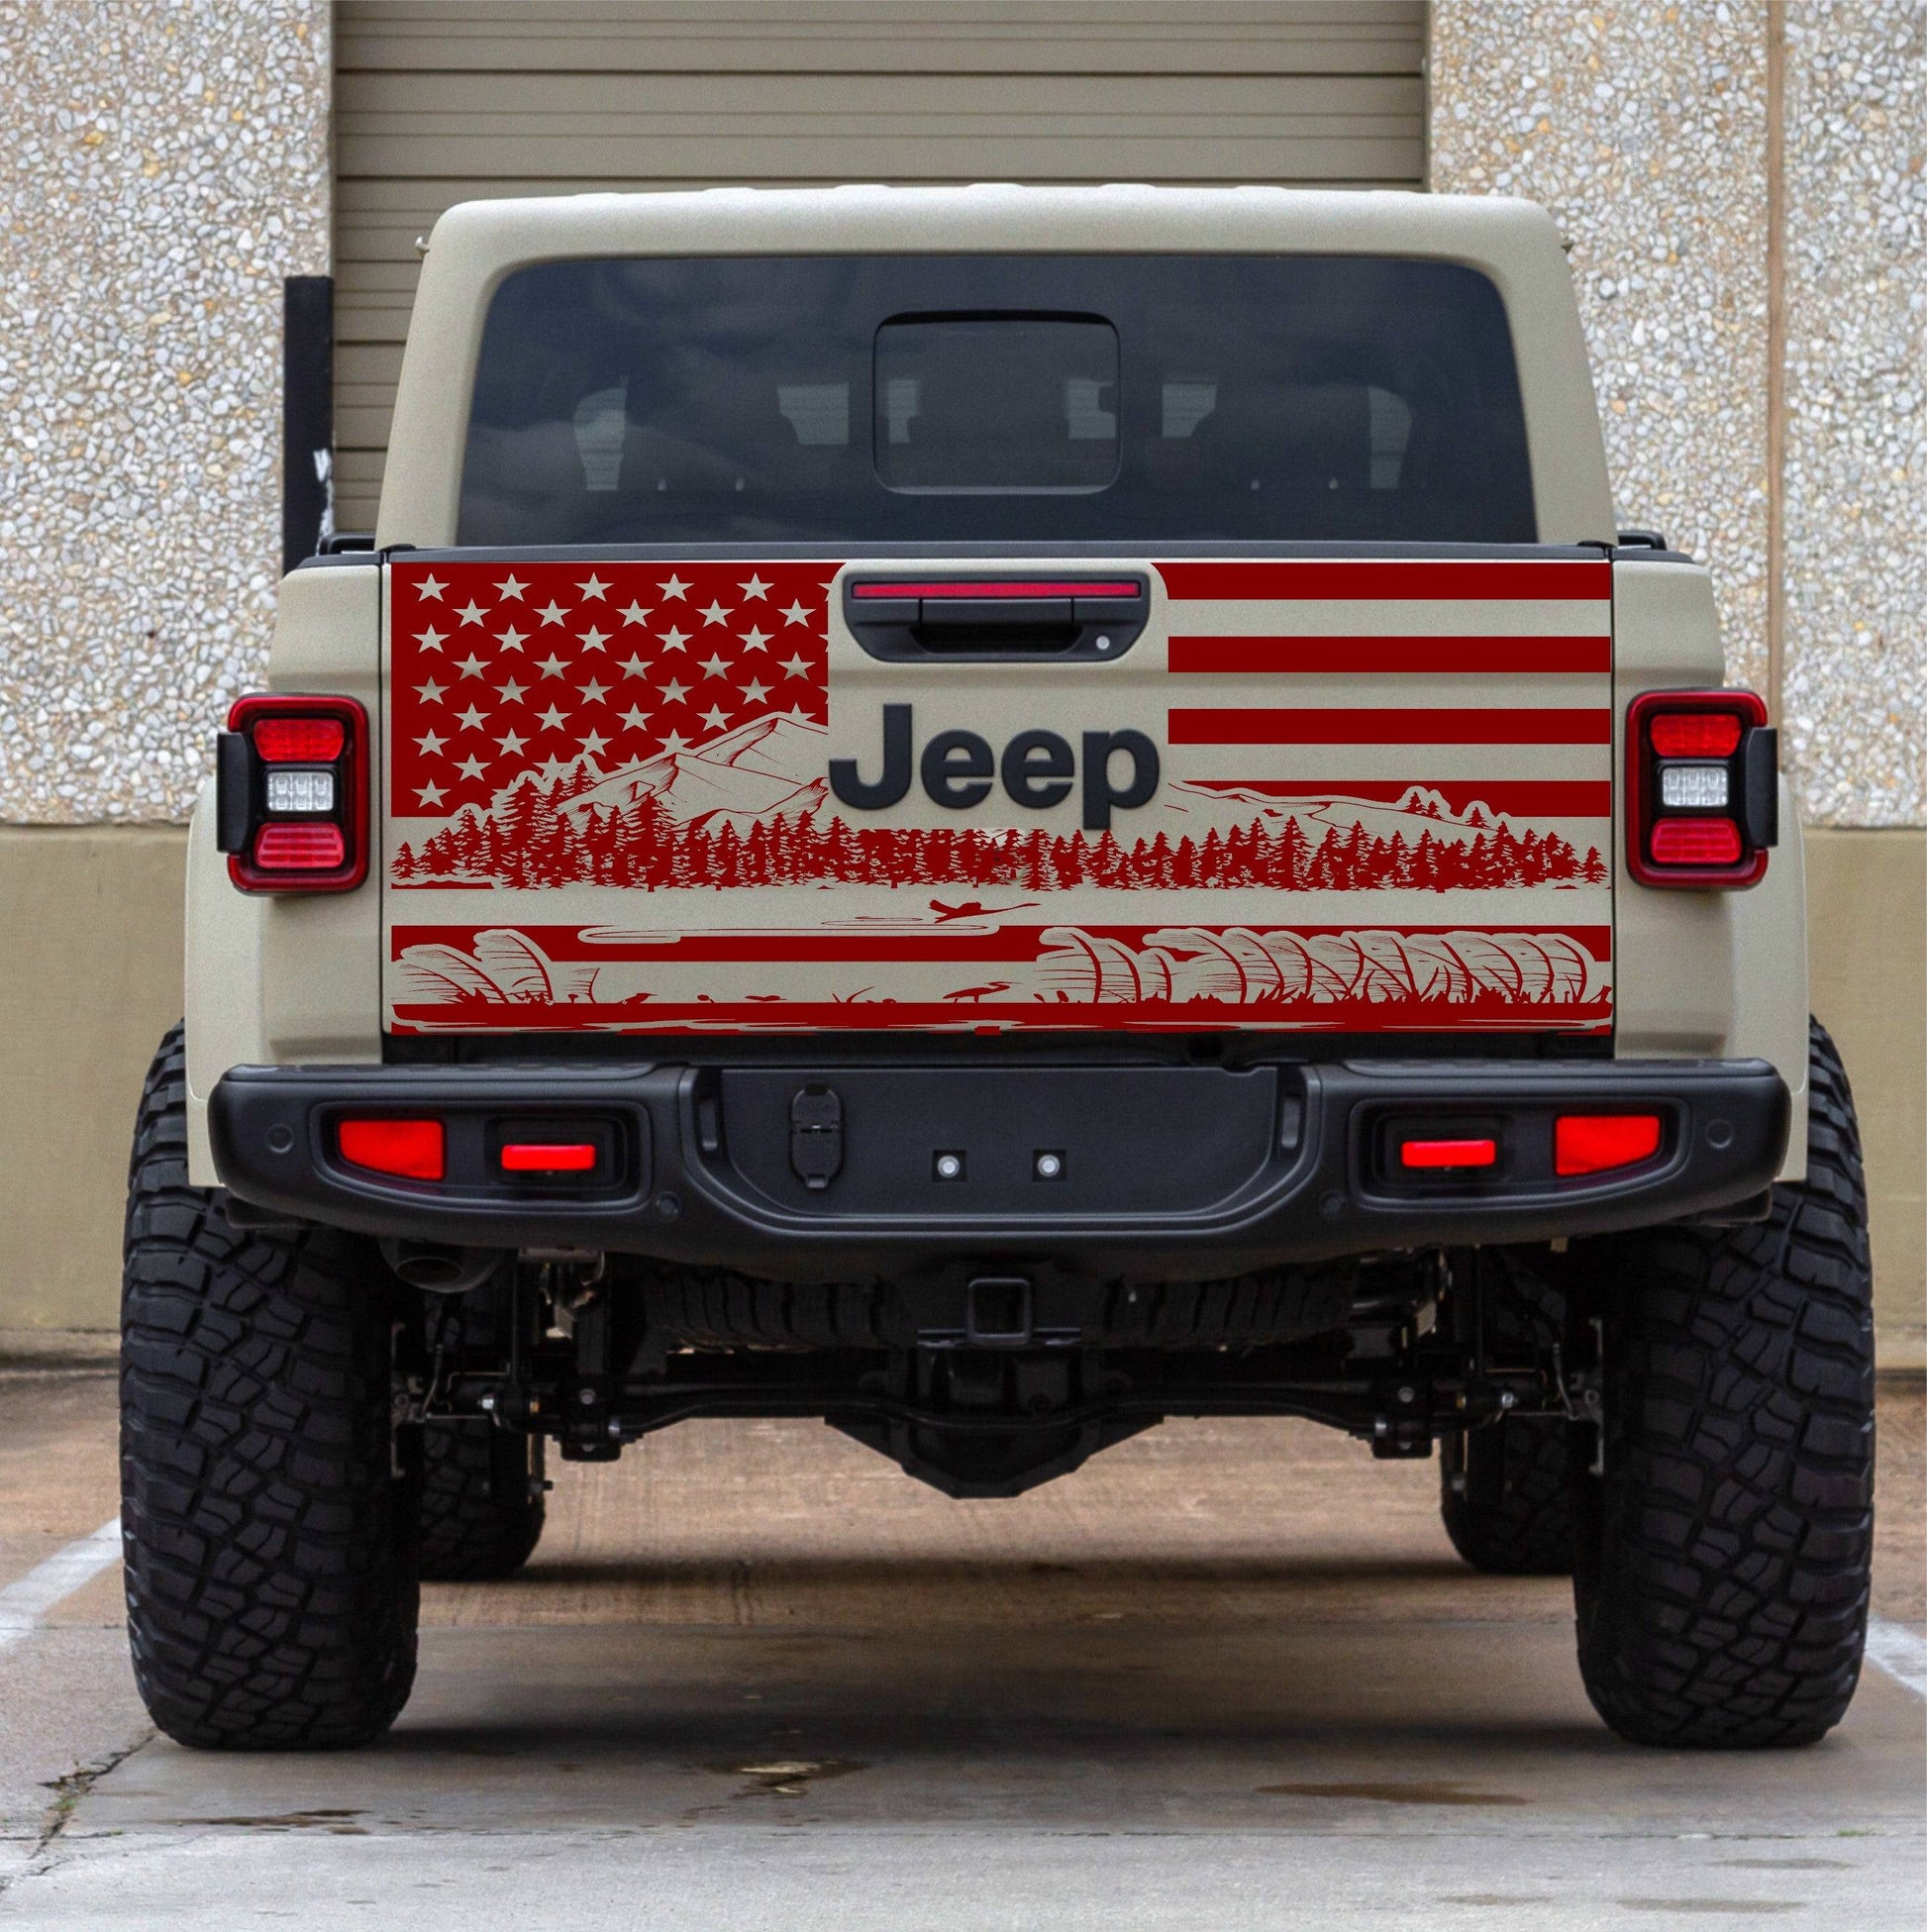 American Flag Mountain Silhouette Vinyl Decal for Jeep Gladiator's Tailgate